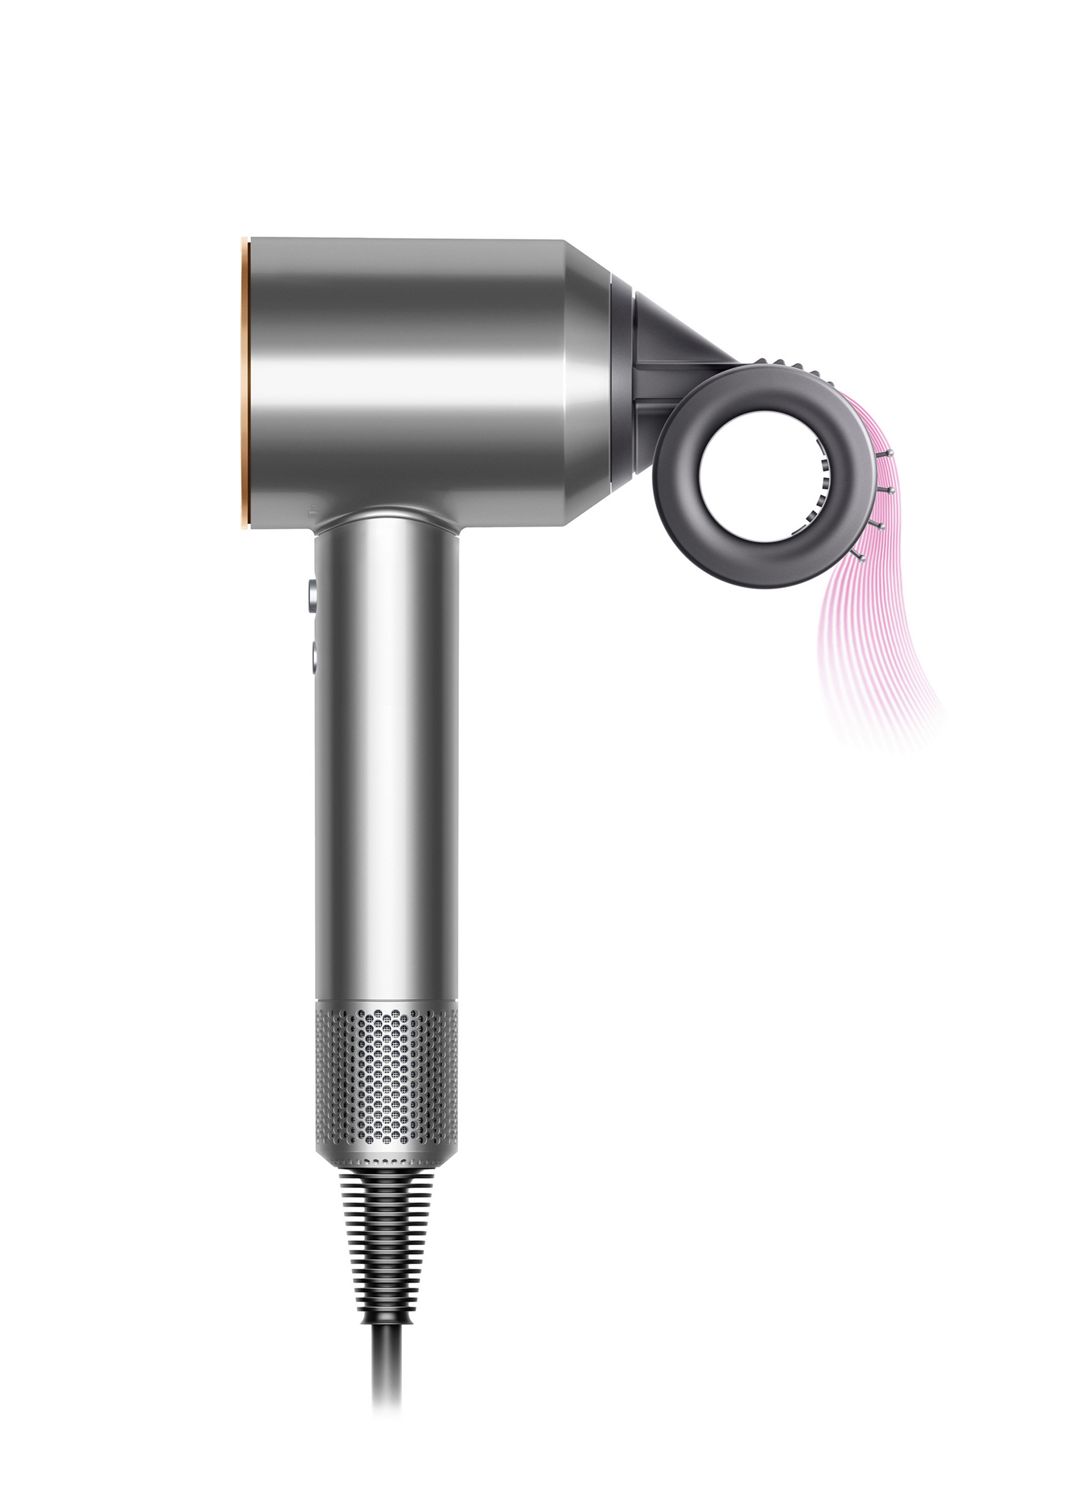 Support for your Re-engineered Dyson Supersonicᵀᴹ hair dryer | Dyson